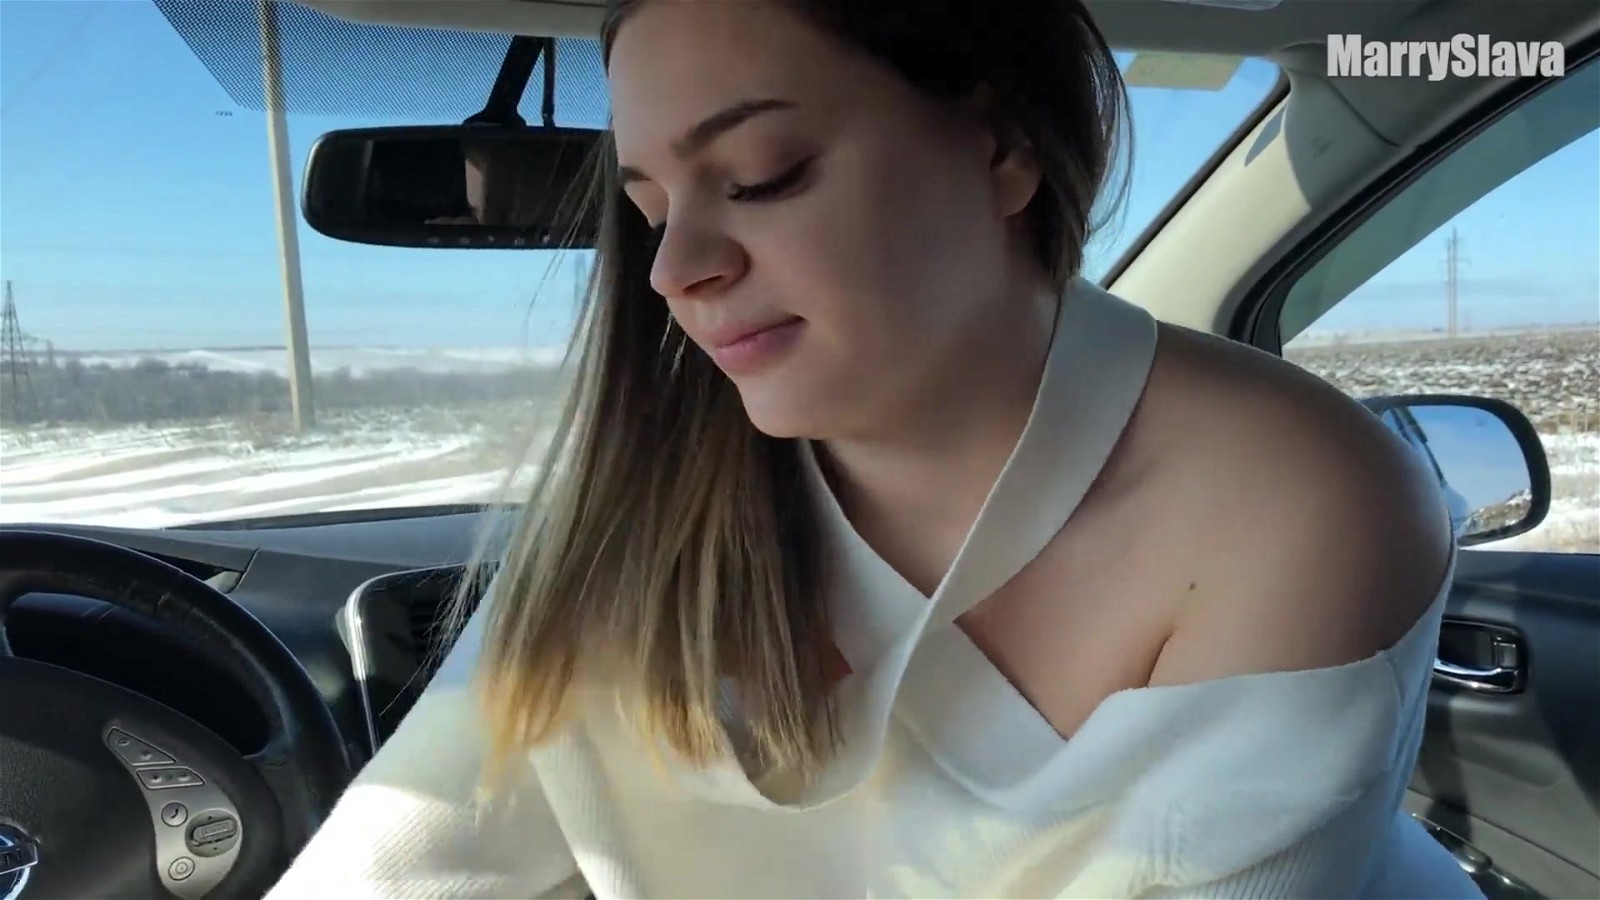 Russian girl sucking dick and getting fucked in the car » PornoReino pic